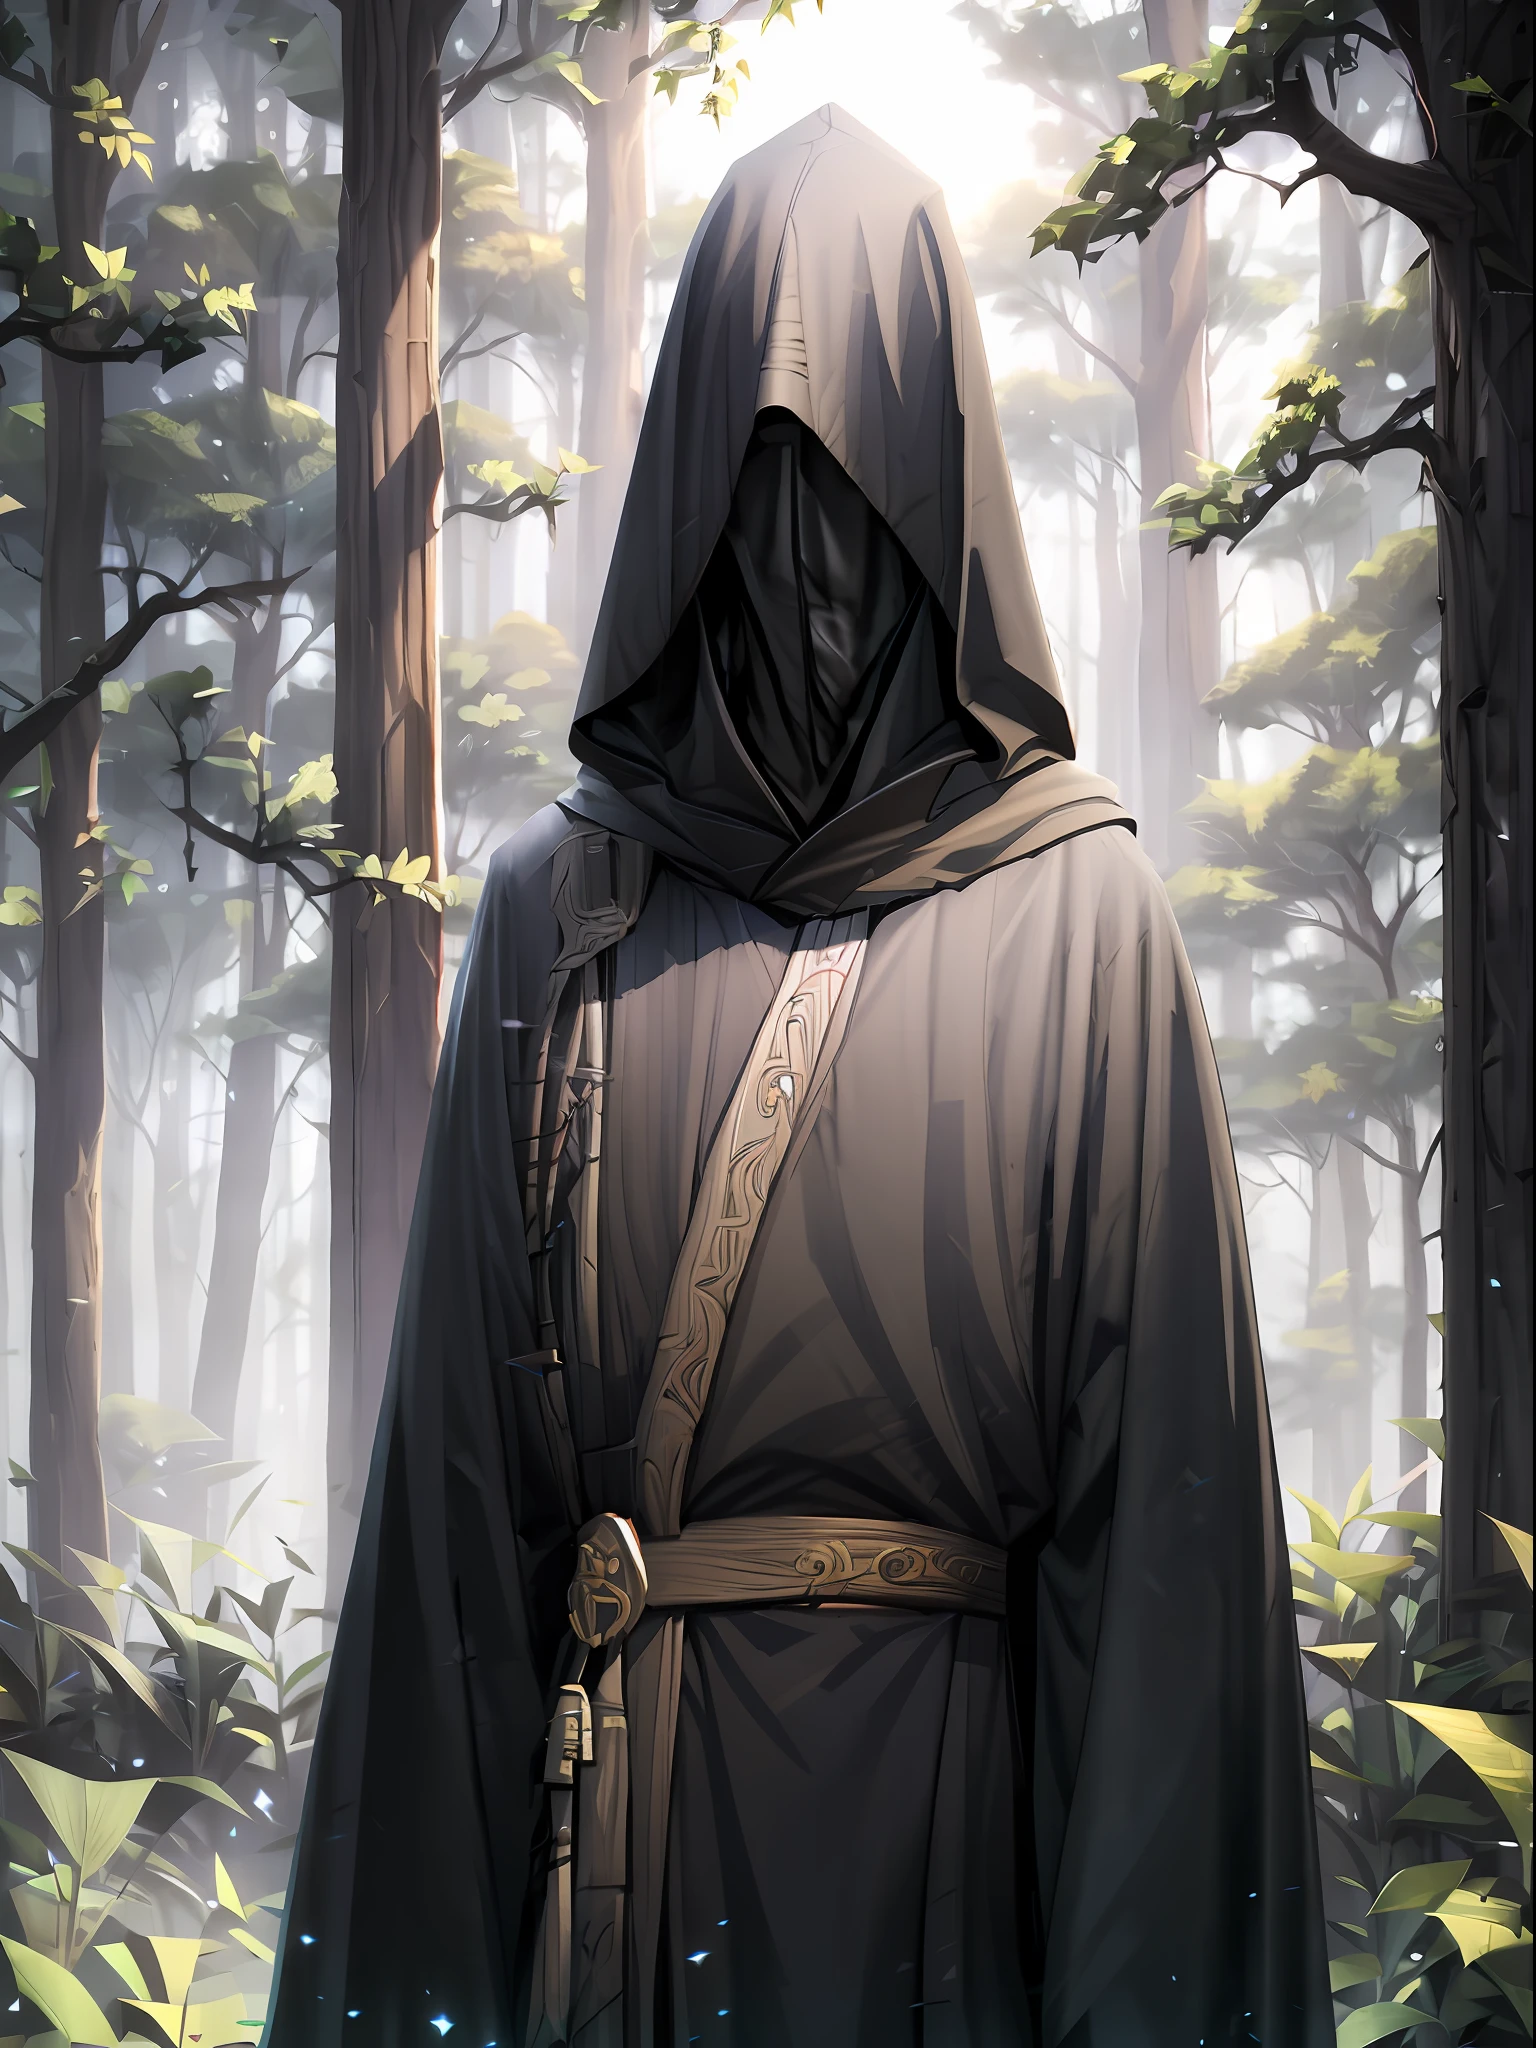 arafed hooded man in a forest with a hood on, cloaked, dark cloaked figure, portrait of a forest mage, dark hooded wraith, dark cloaked necromancer, dark robed, dark robe, hooded cloaked sith lord, wearing dark robe, black cloak hidden in shadows, wearing a flowing cloak, robed, dark flowing robe